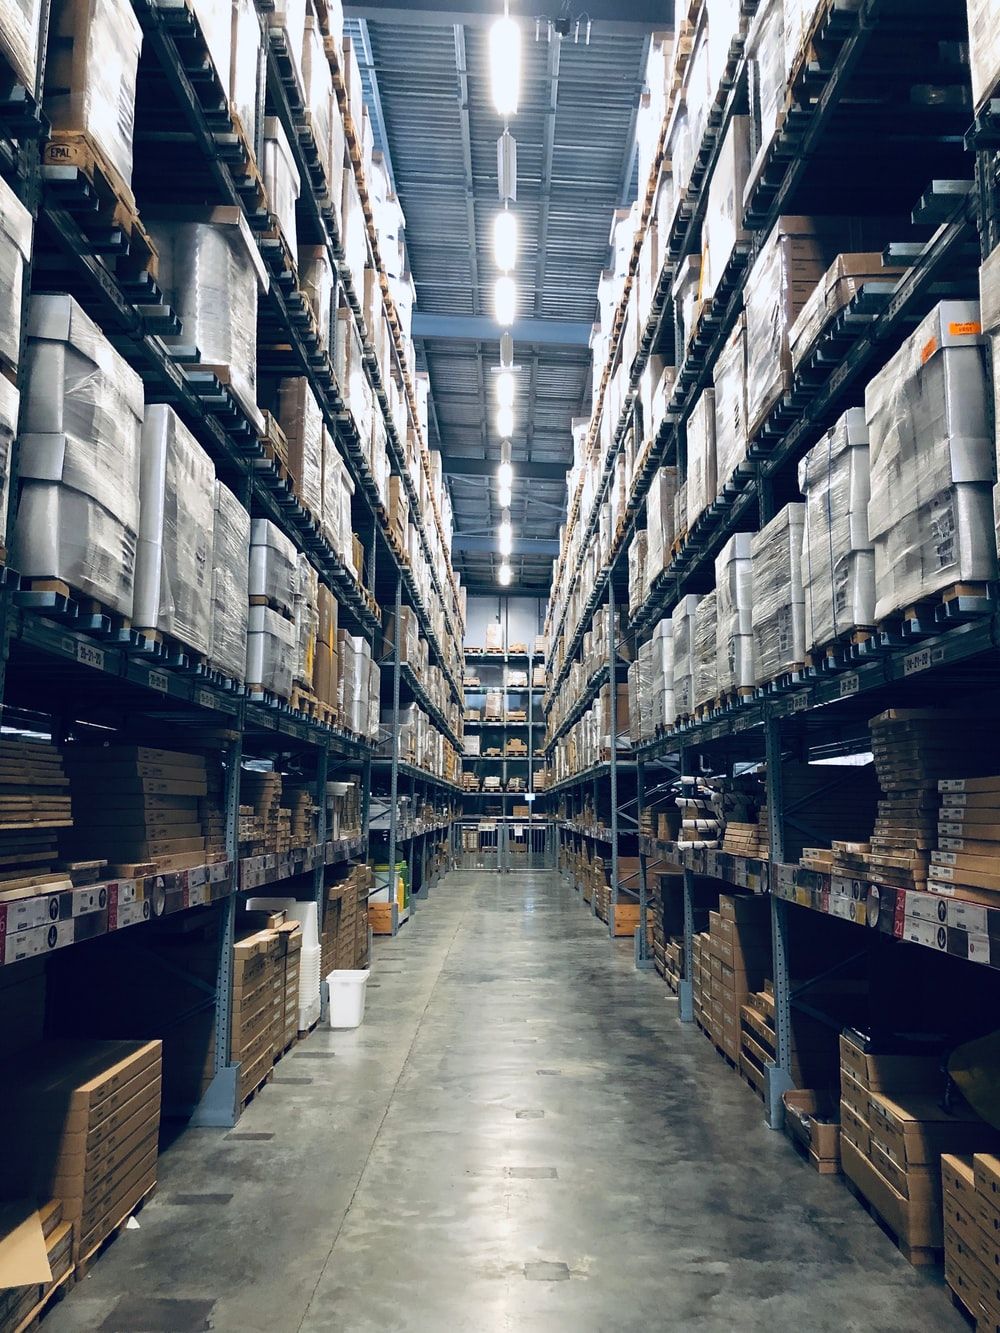 Warehouse Picture. Download Free Image